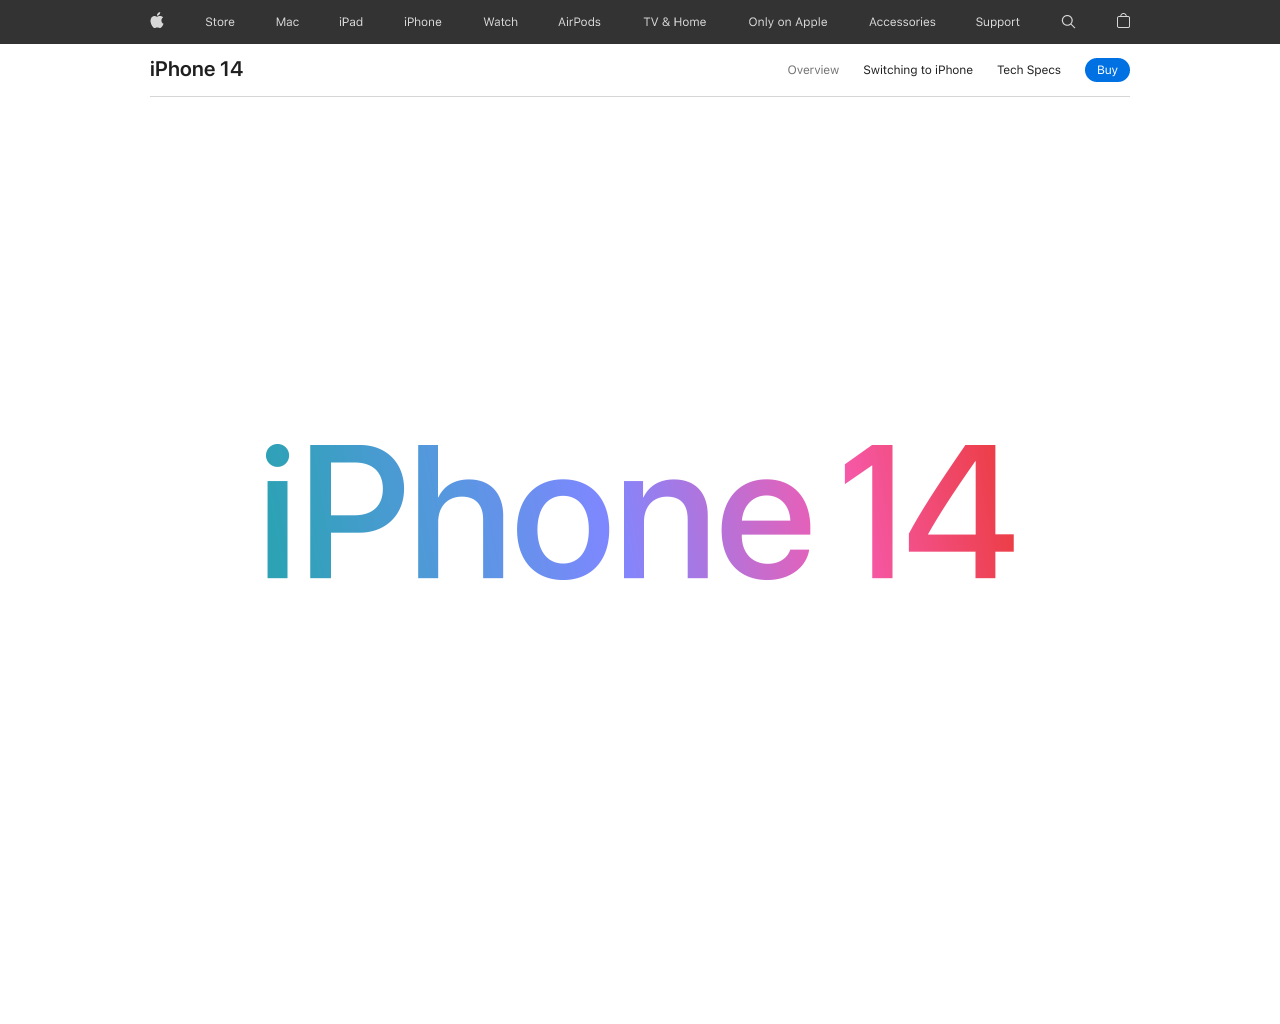 iPhone 14 web page